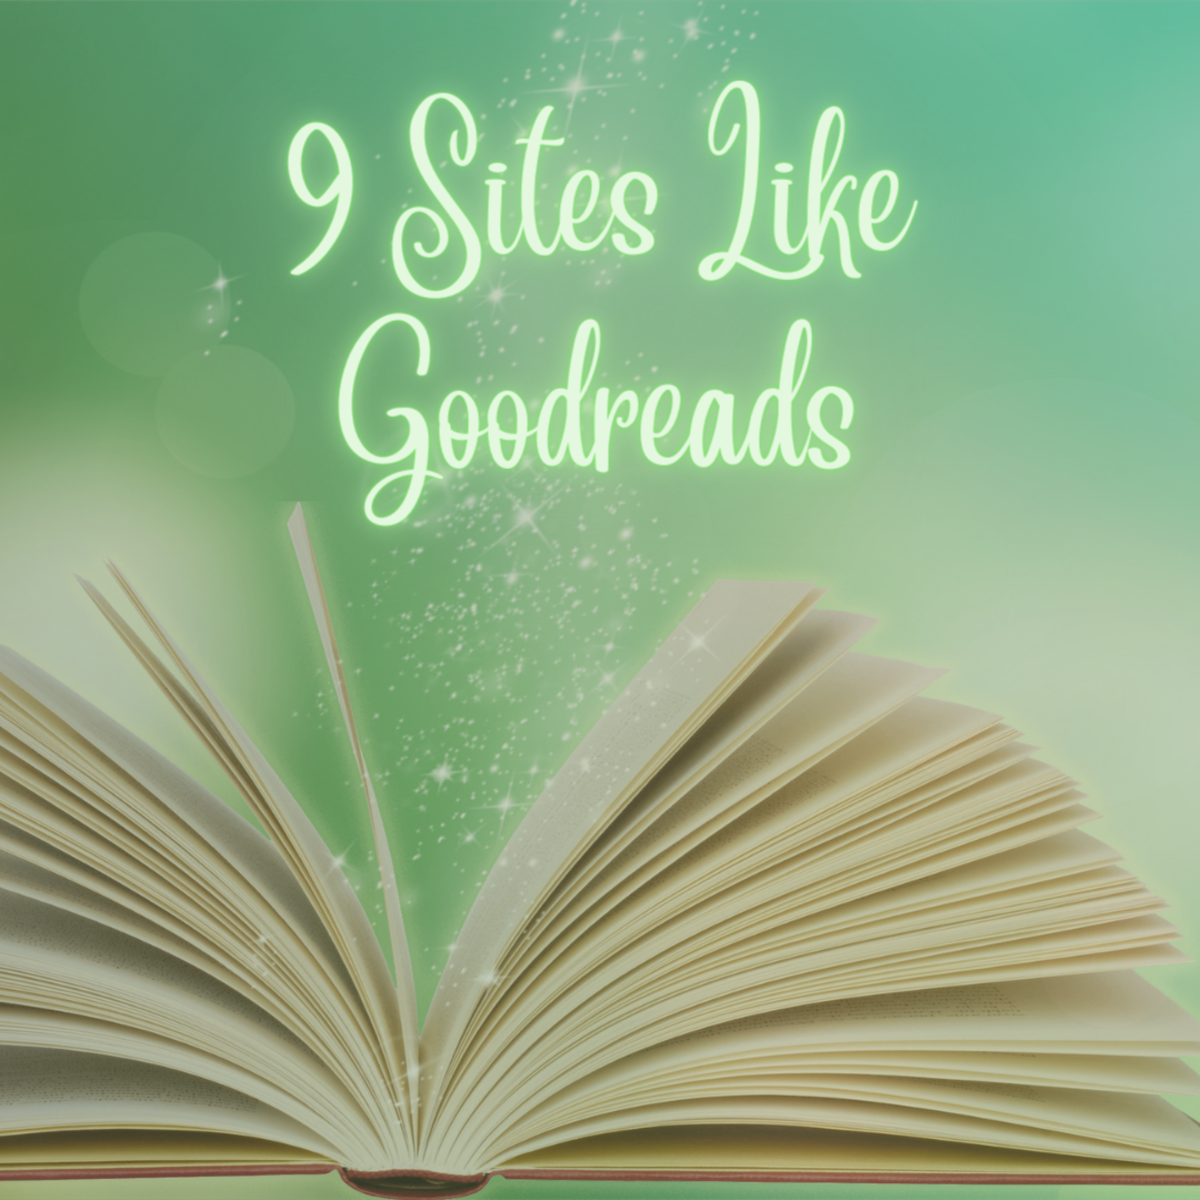 9 Sites like Goodreads for Authors and Readers